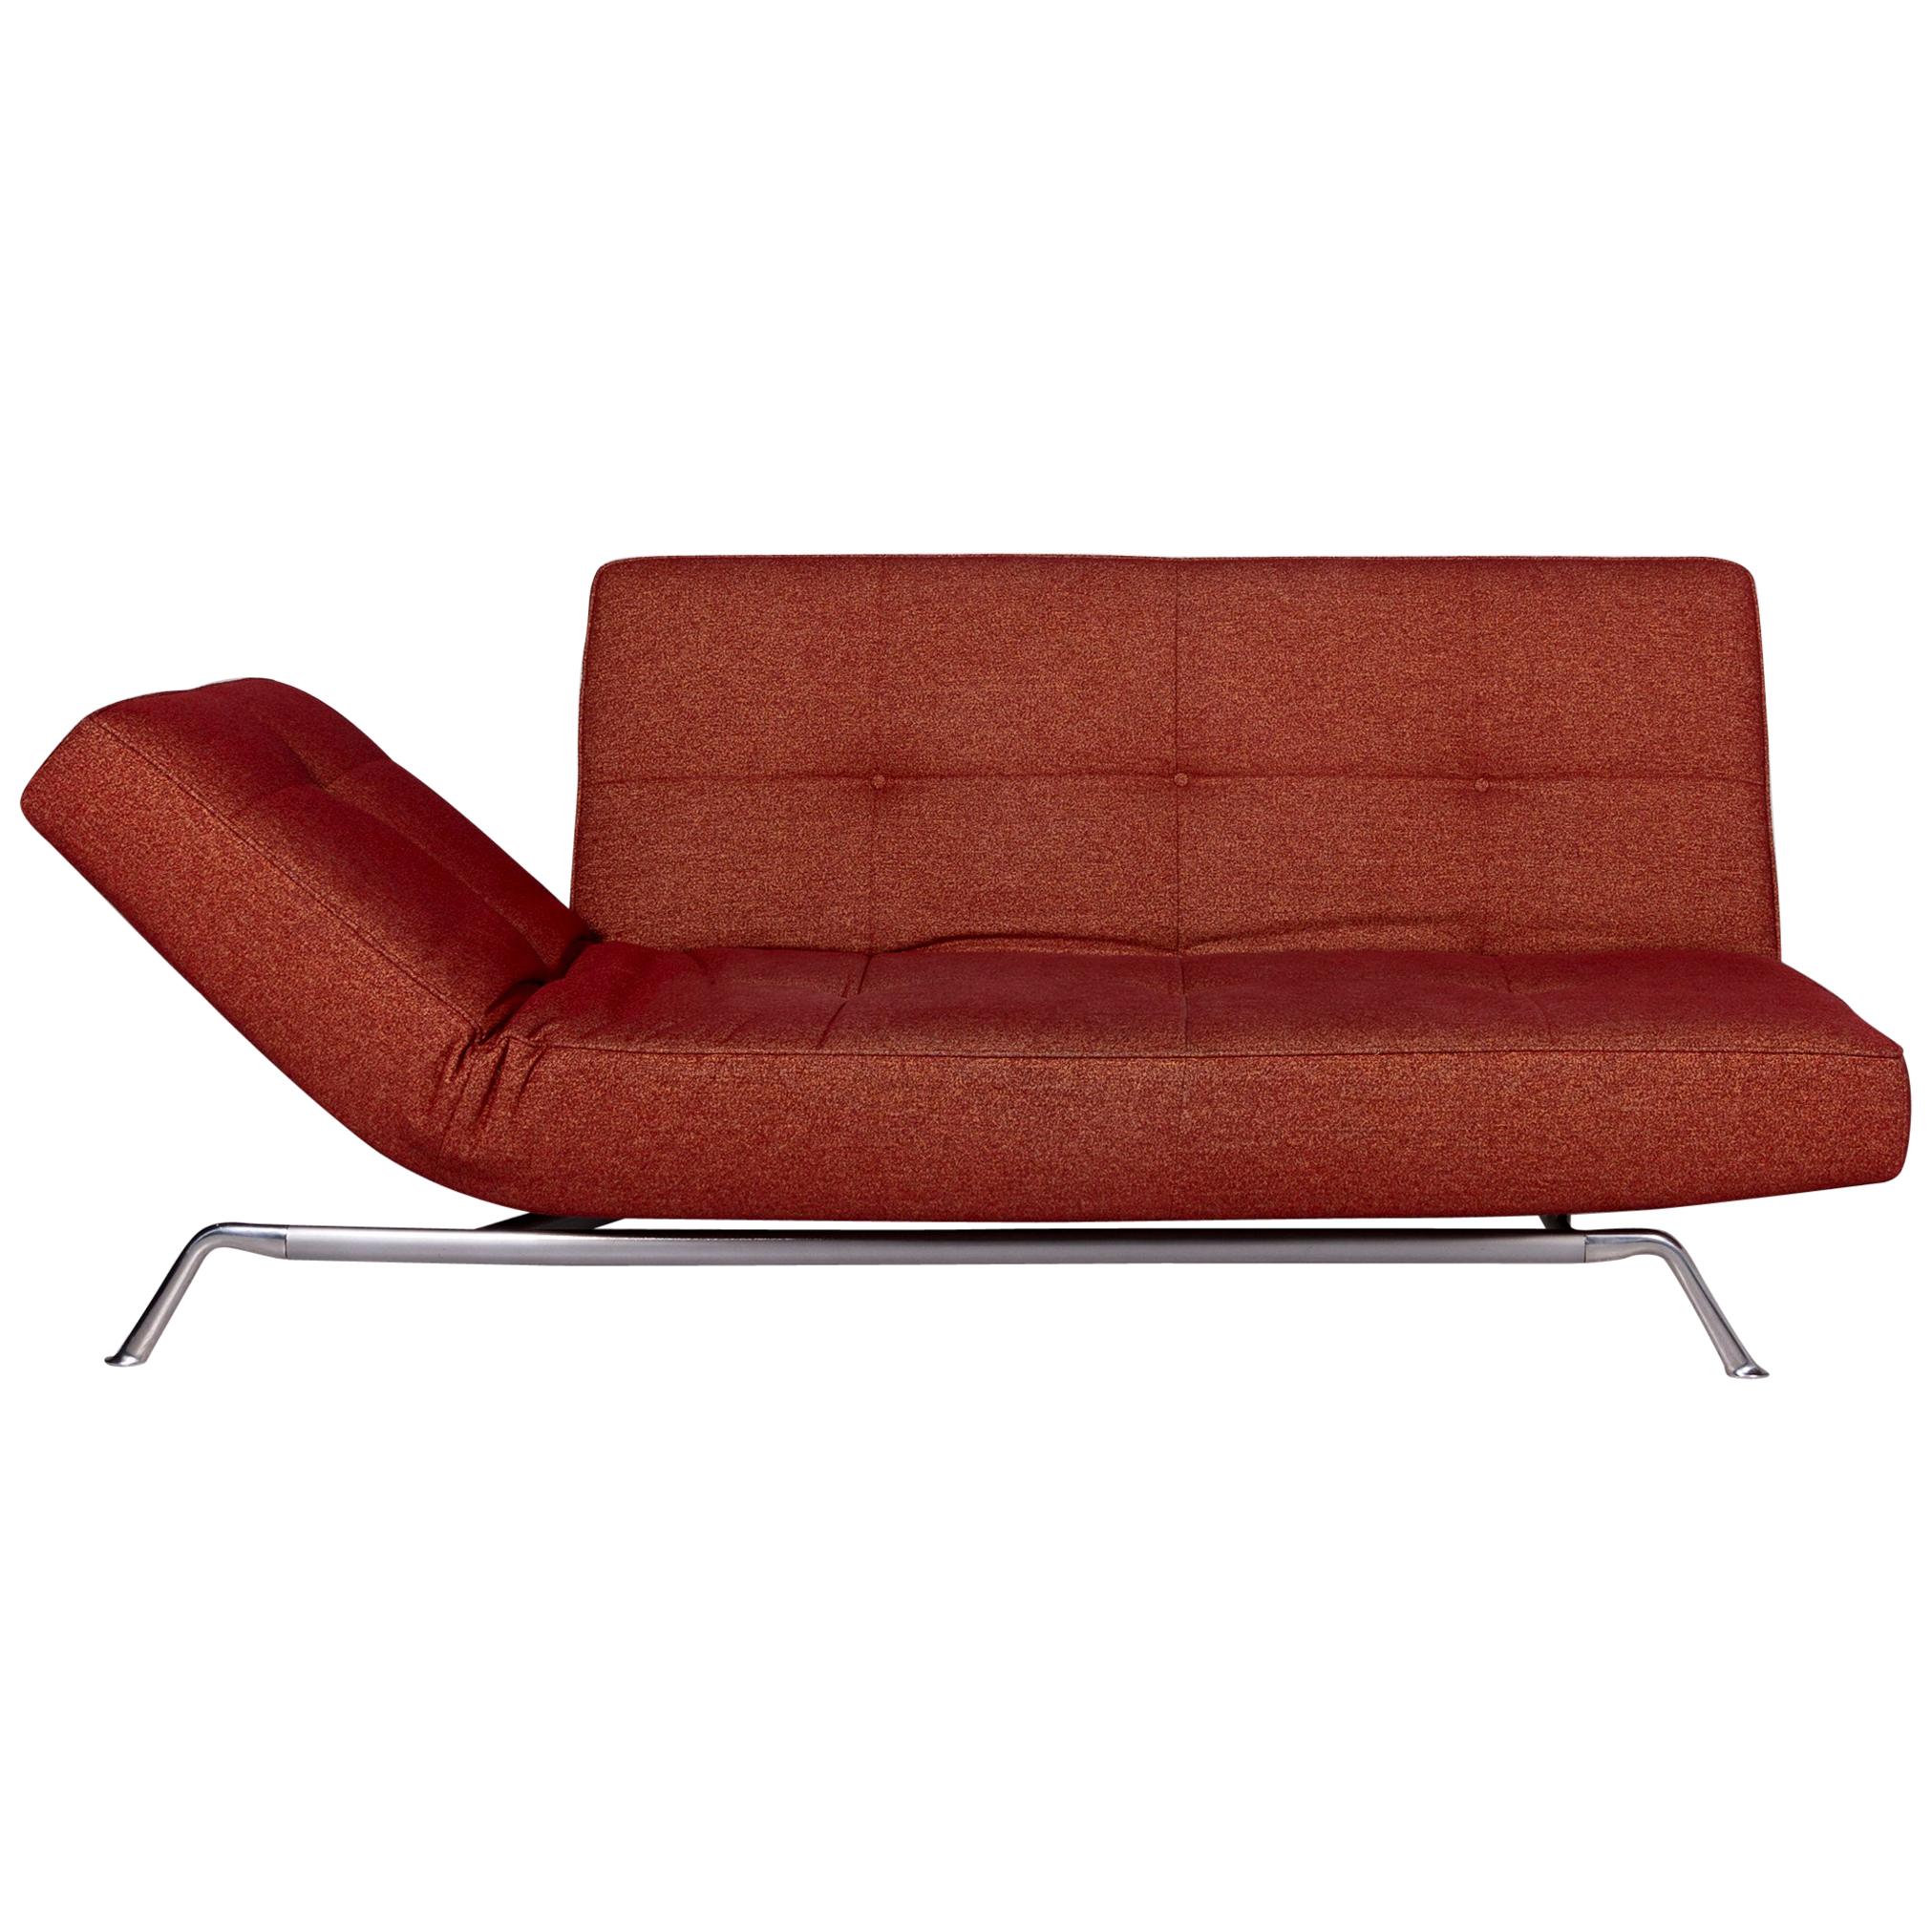 Ligne Roset Smala Fabric Sofa Red Three-Seat Sofa Bed Function Couch